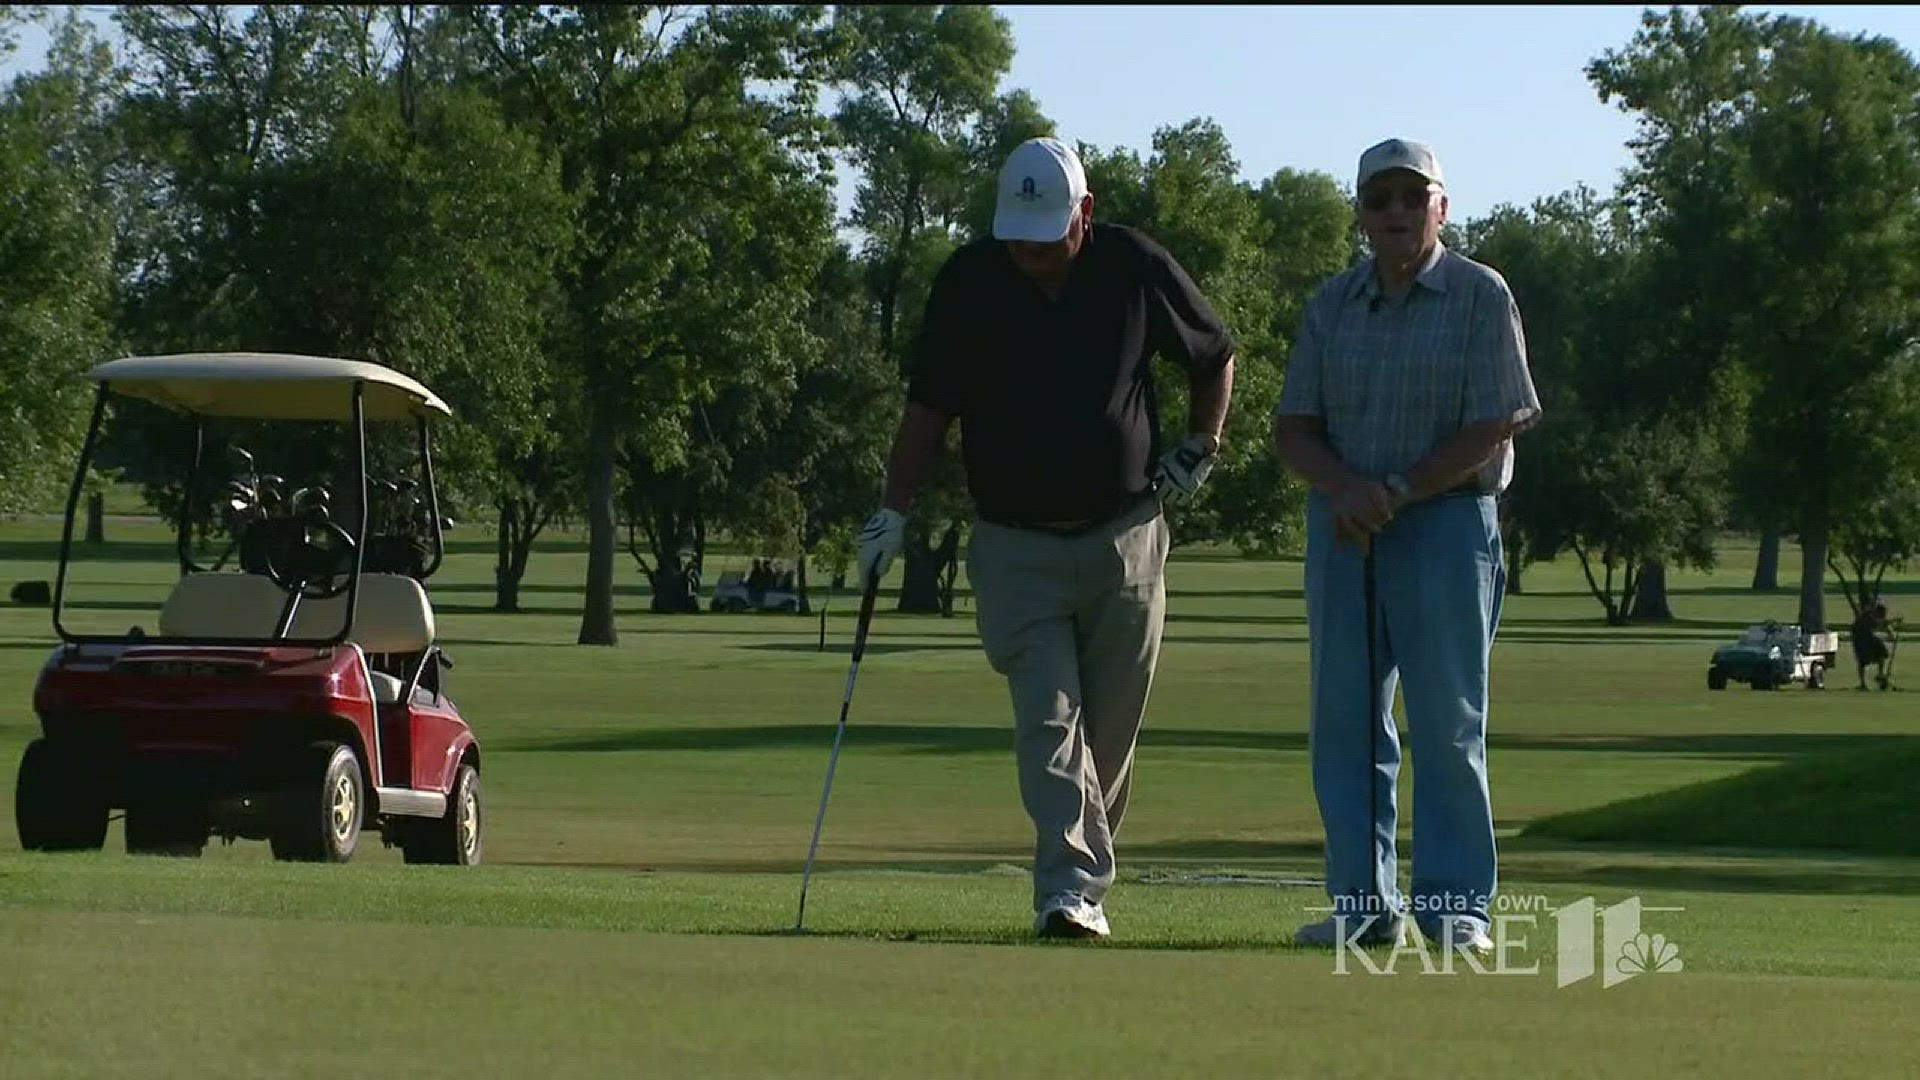 KARE 11's Boyd Huppert first told us about "The Duffers" in 2011, but this unique golf league in Madison, Minnesota is now in its 28th season. http://kare11.tv/2vcrvOh